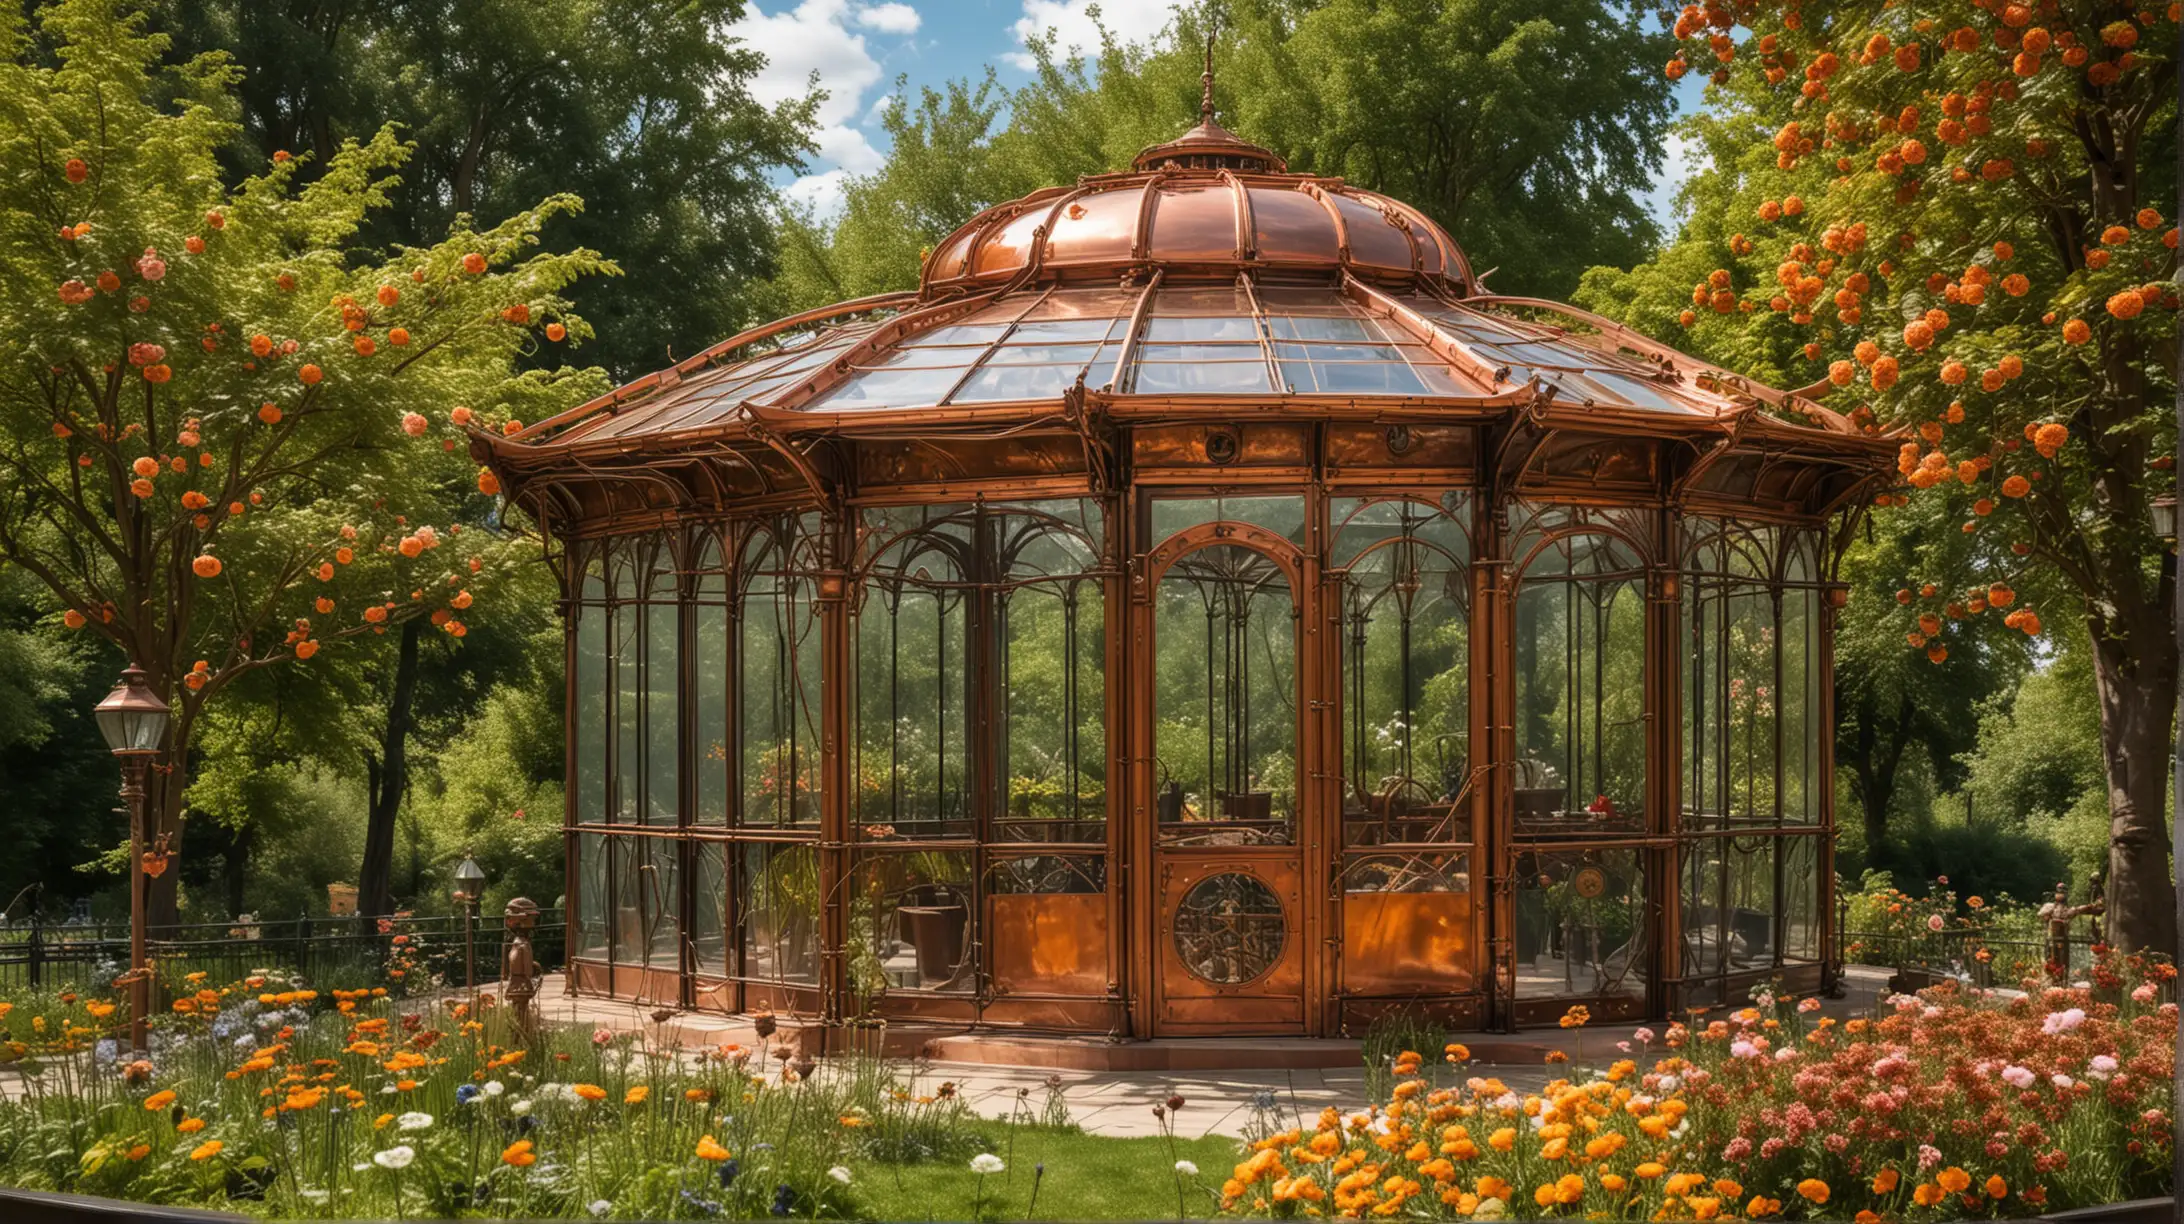 a steampunk pavilion made of copper and glass in a botanical garden, many flowers and fruit trees, sunny